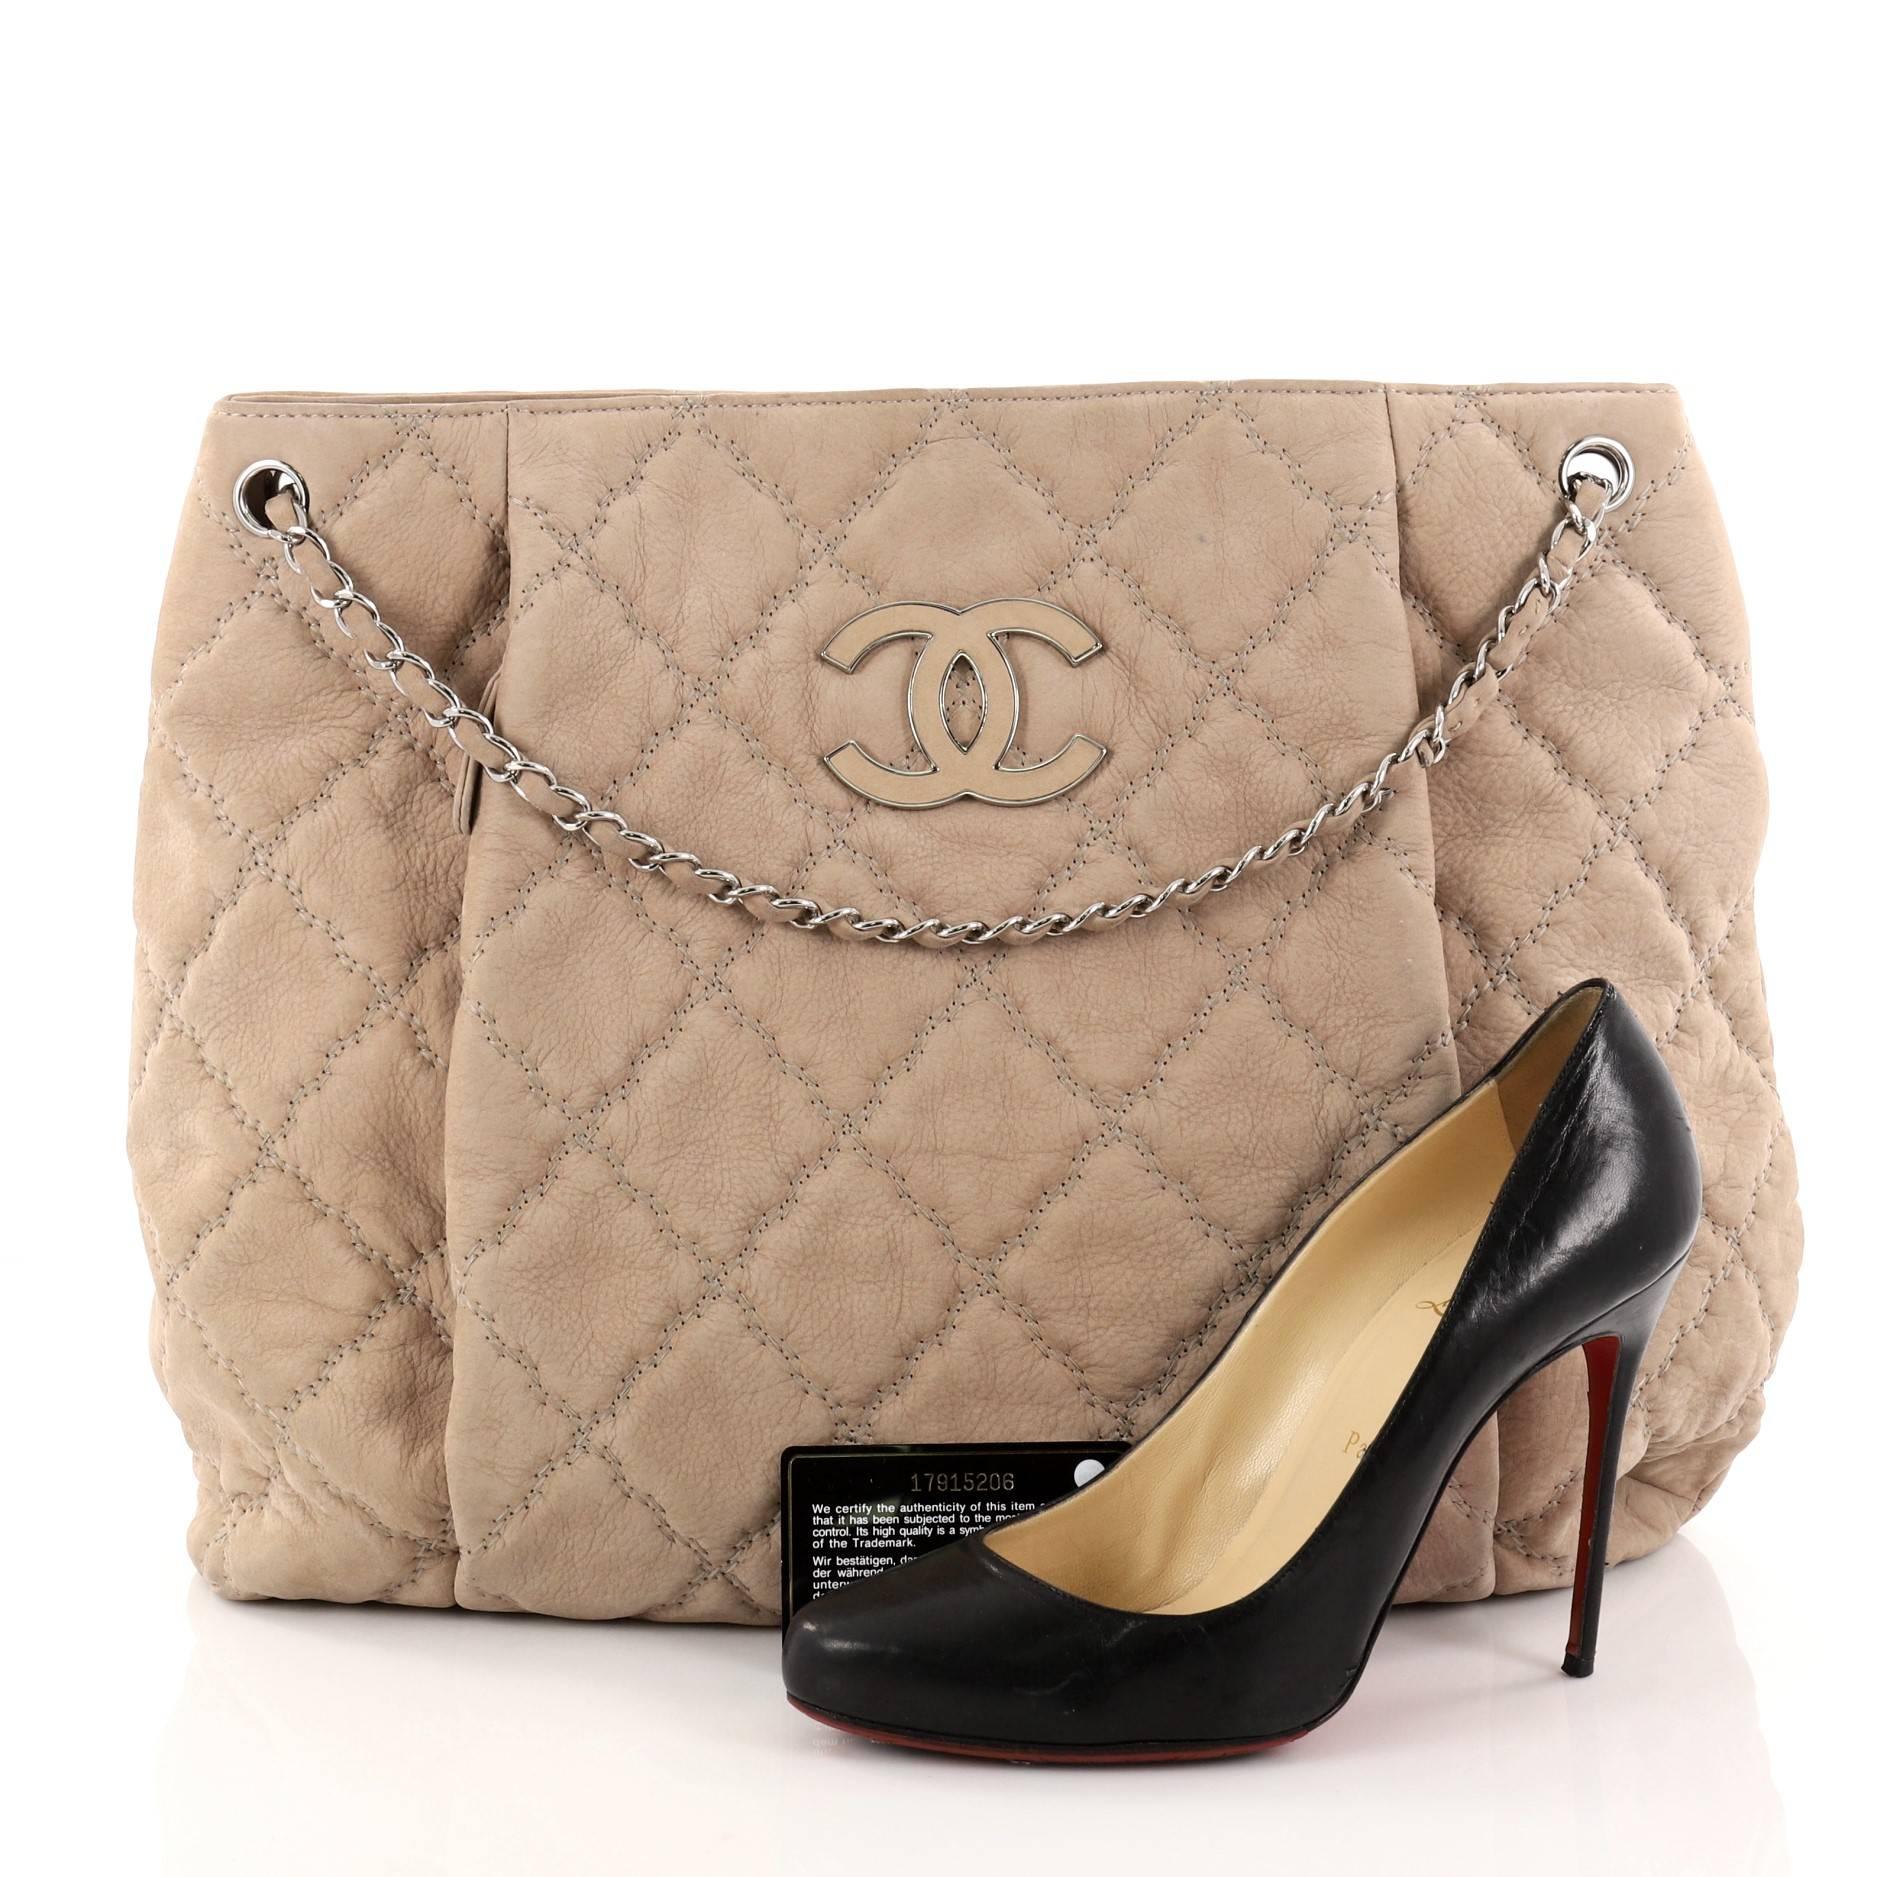 This authentic Chanel Double Stitch Hampton Shoulder Bag Quilted Nubuck Large first released in 2011, is a casual-cool bag perfect for everyday use. Crafted from taupe nubuck leather with double stitched puffy quilting, this shoulder bag features